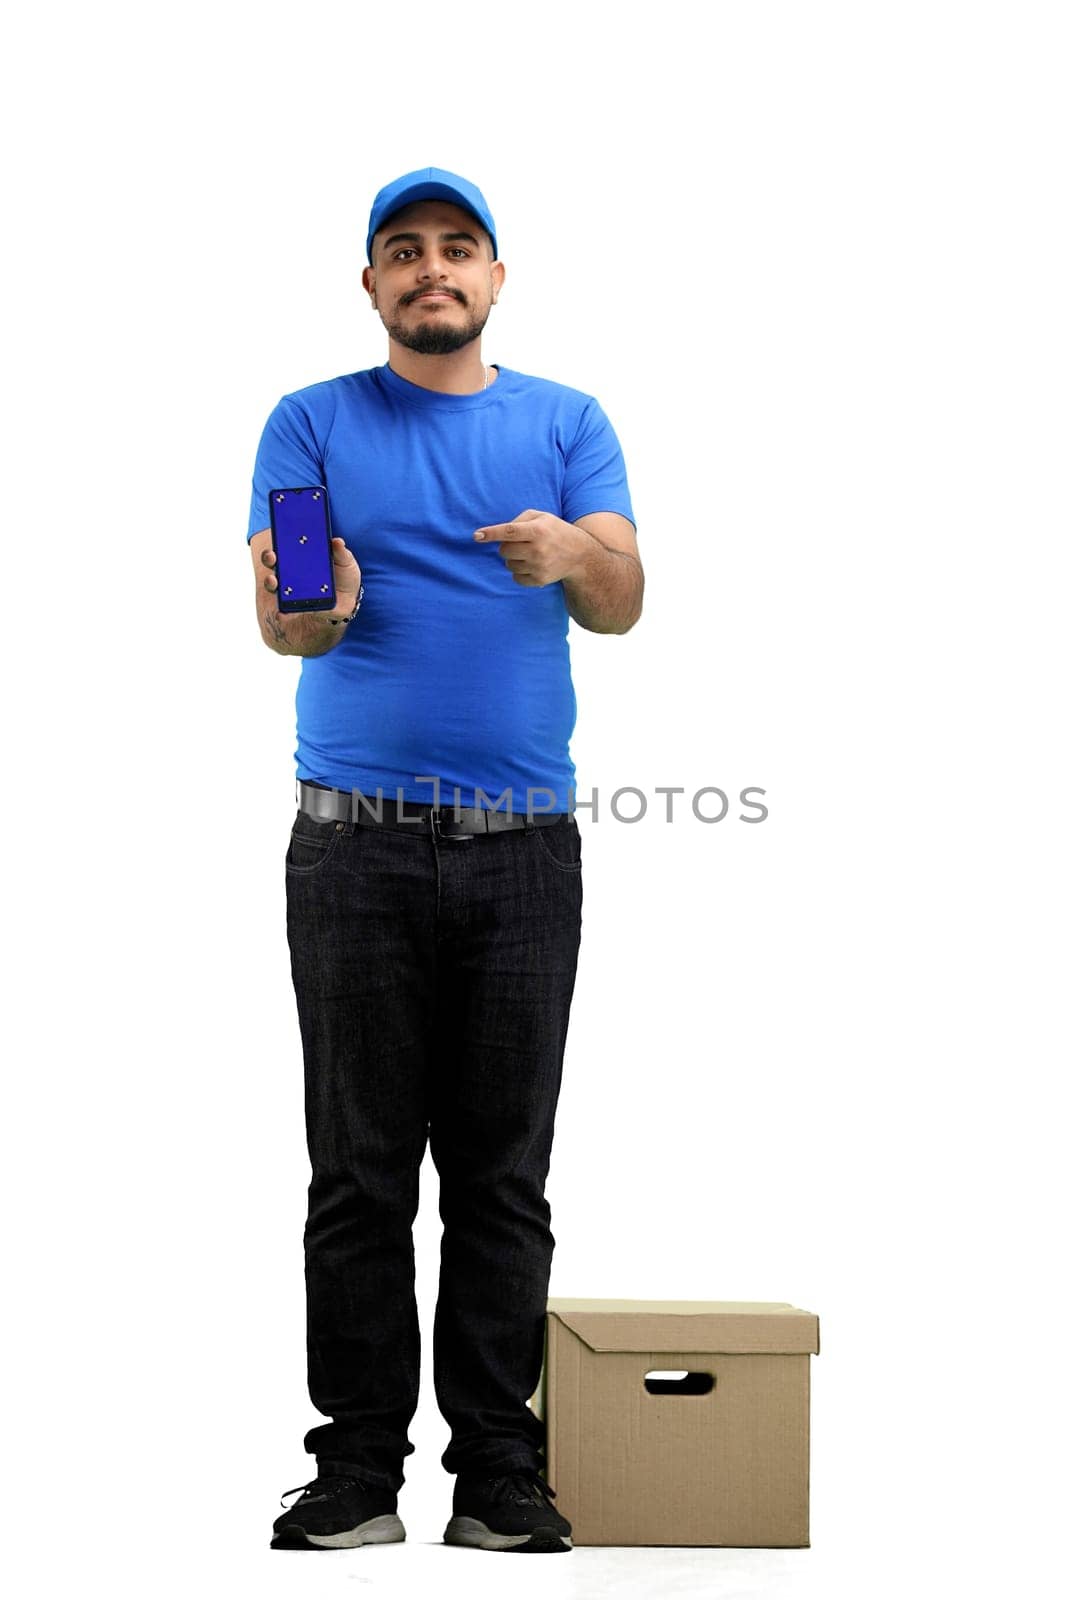 The deliveryman, in full height, on a white background, with a box, shows the phone.